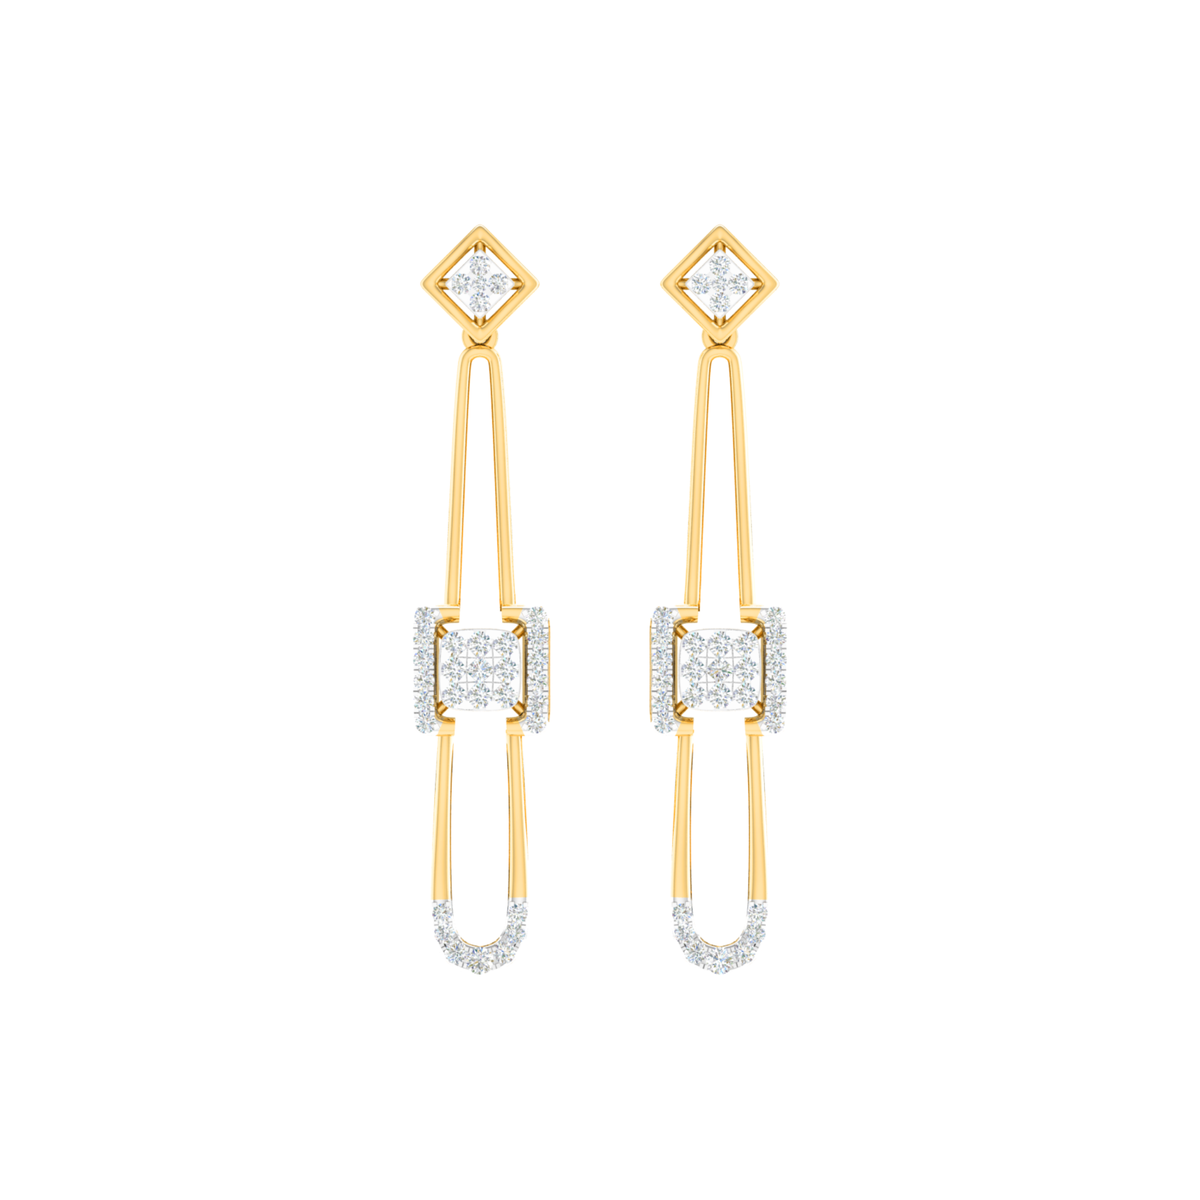 18KT ROSE GOLD VICTORIA REAL DIAMOND EARRINGS